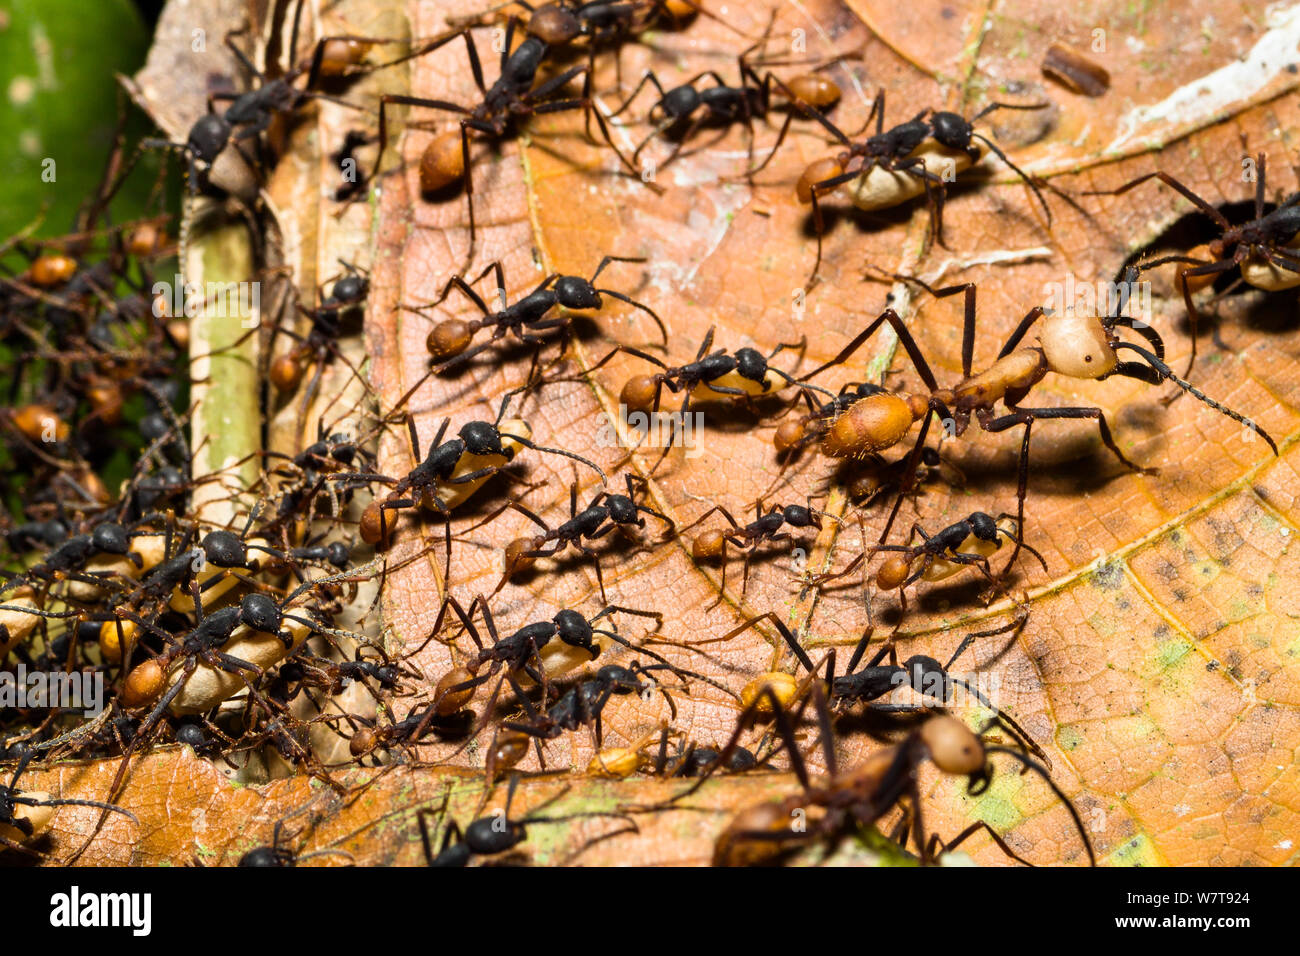 Army Ants (Eciton burchelli) workers carrying pupae during migration phase with large soldier ant, in rainforest at Tambopata river, Tambopata National Reserve, Peru, South America. Stock Photo